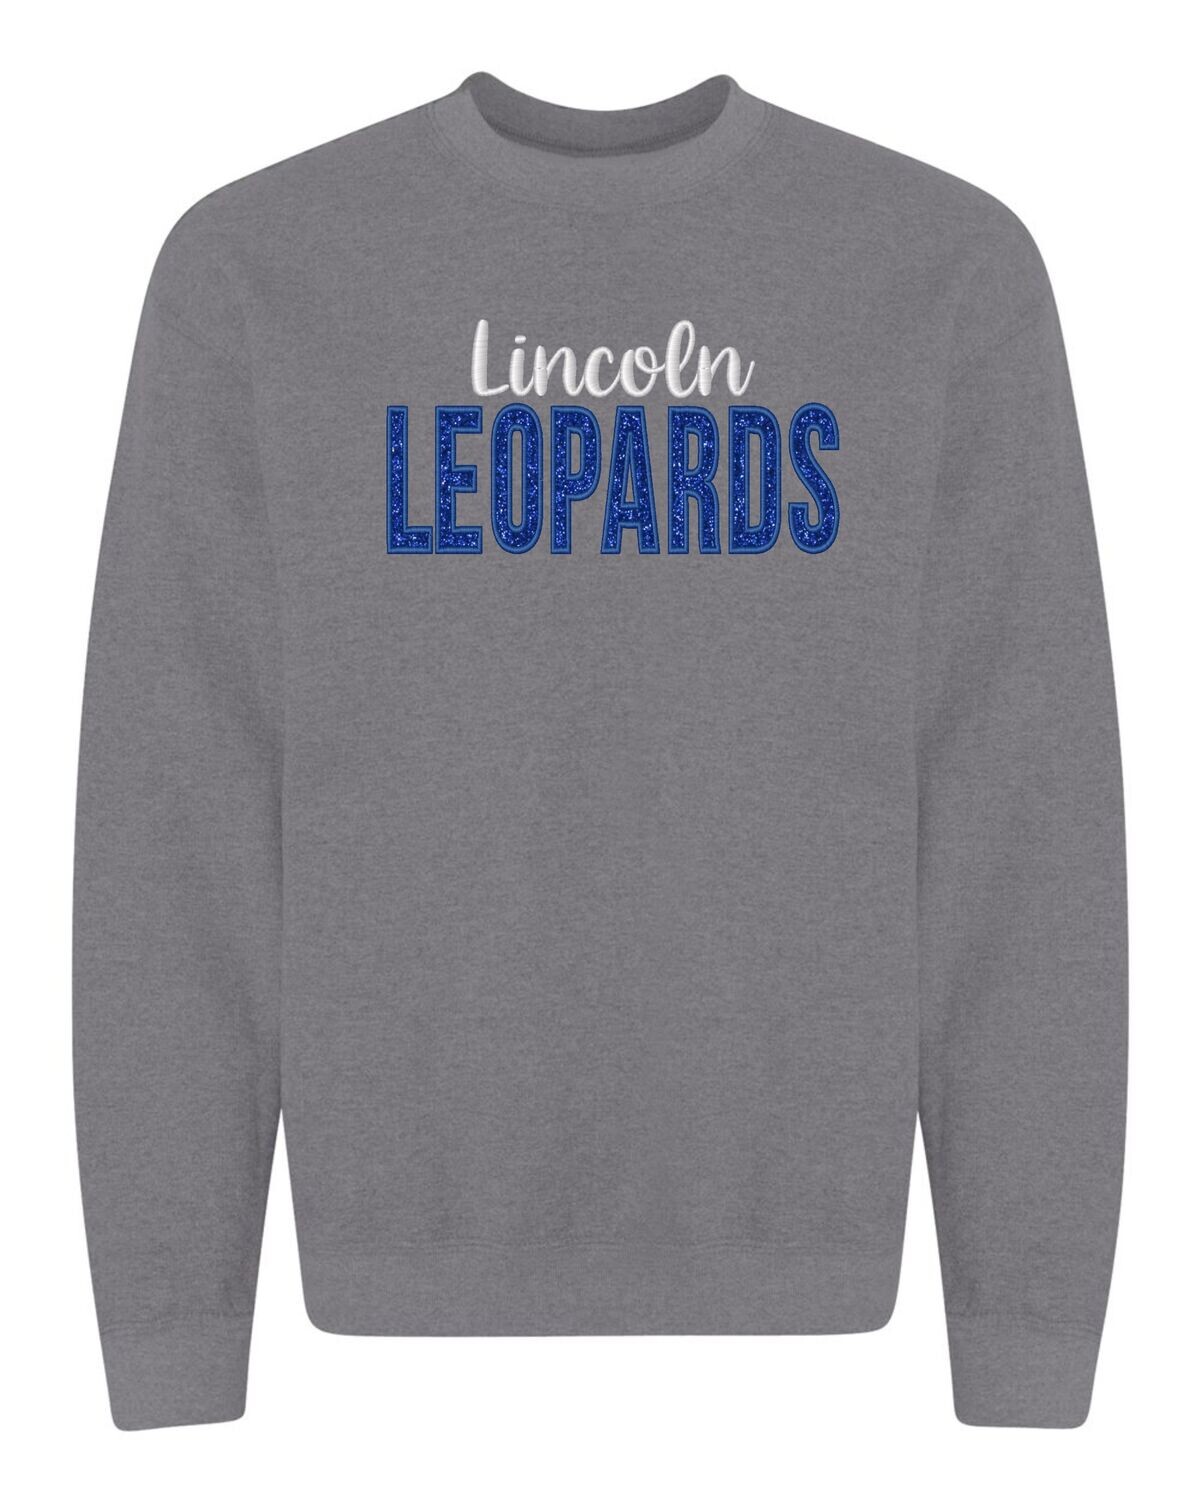 EMBROIDERED GLITTER LINCOLN LEOPARDS SWEATSHIRT